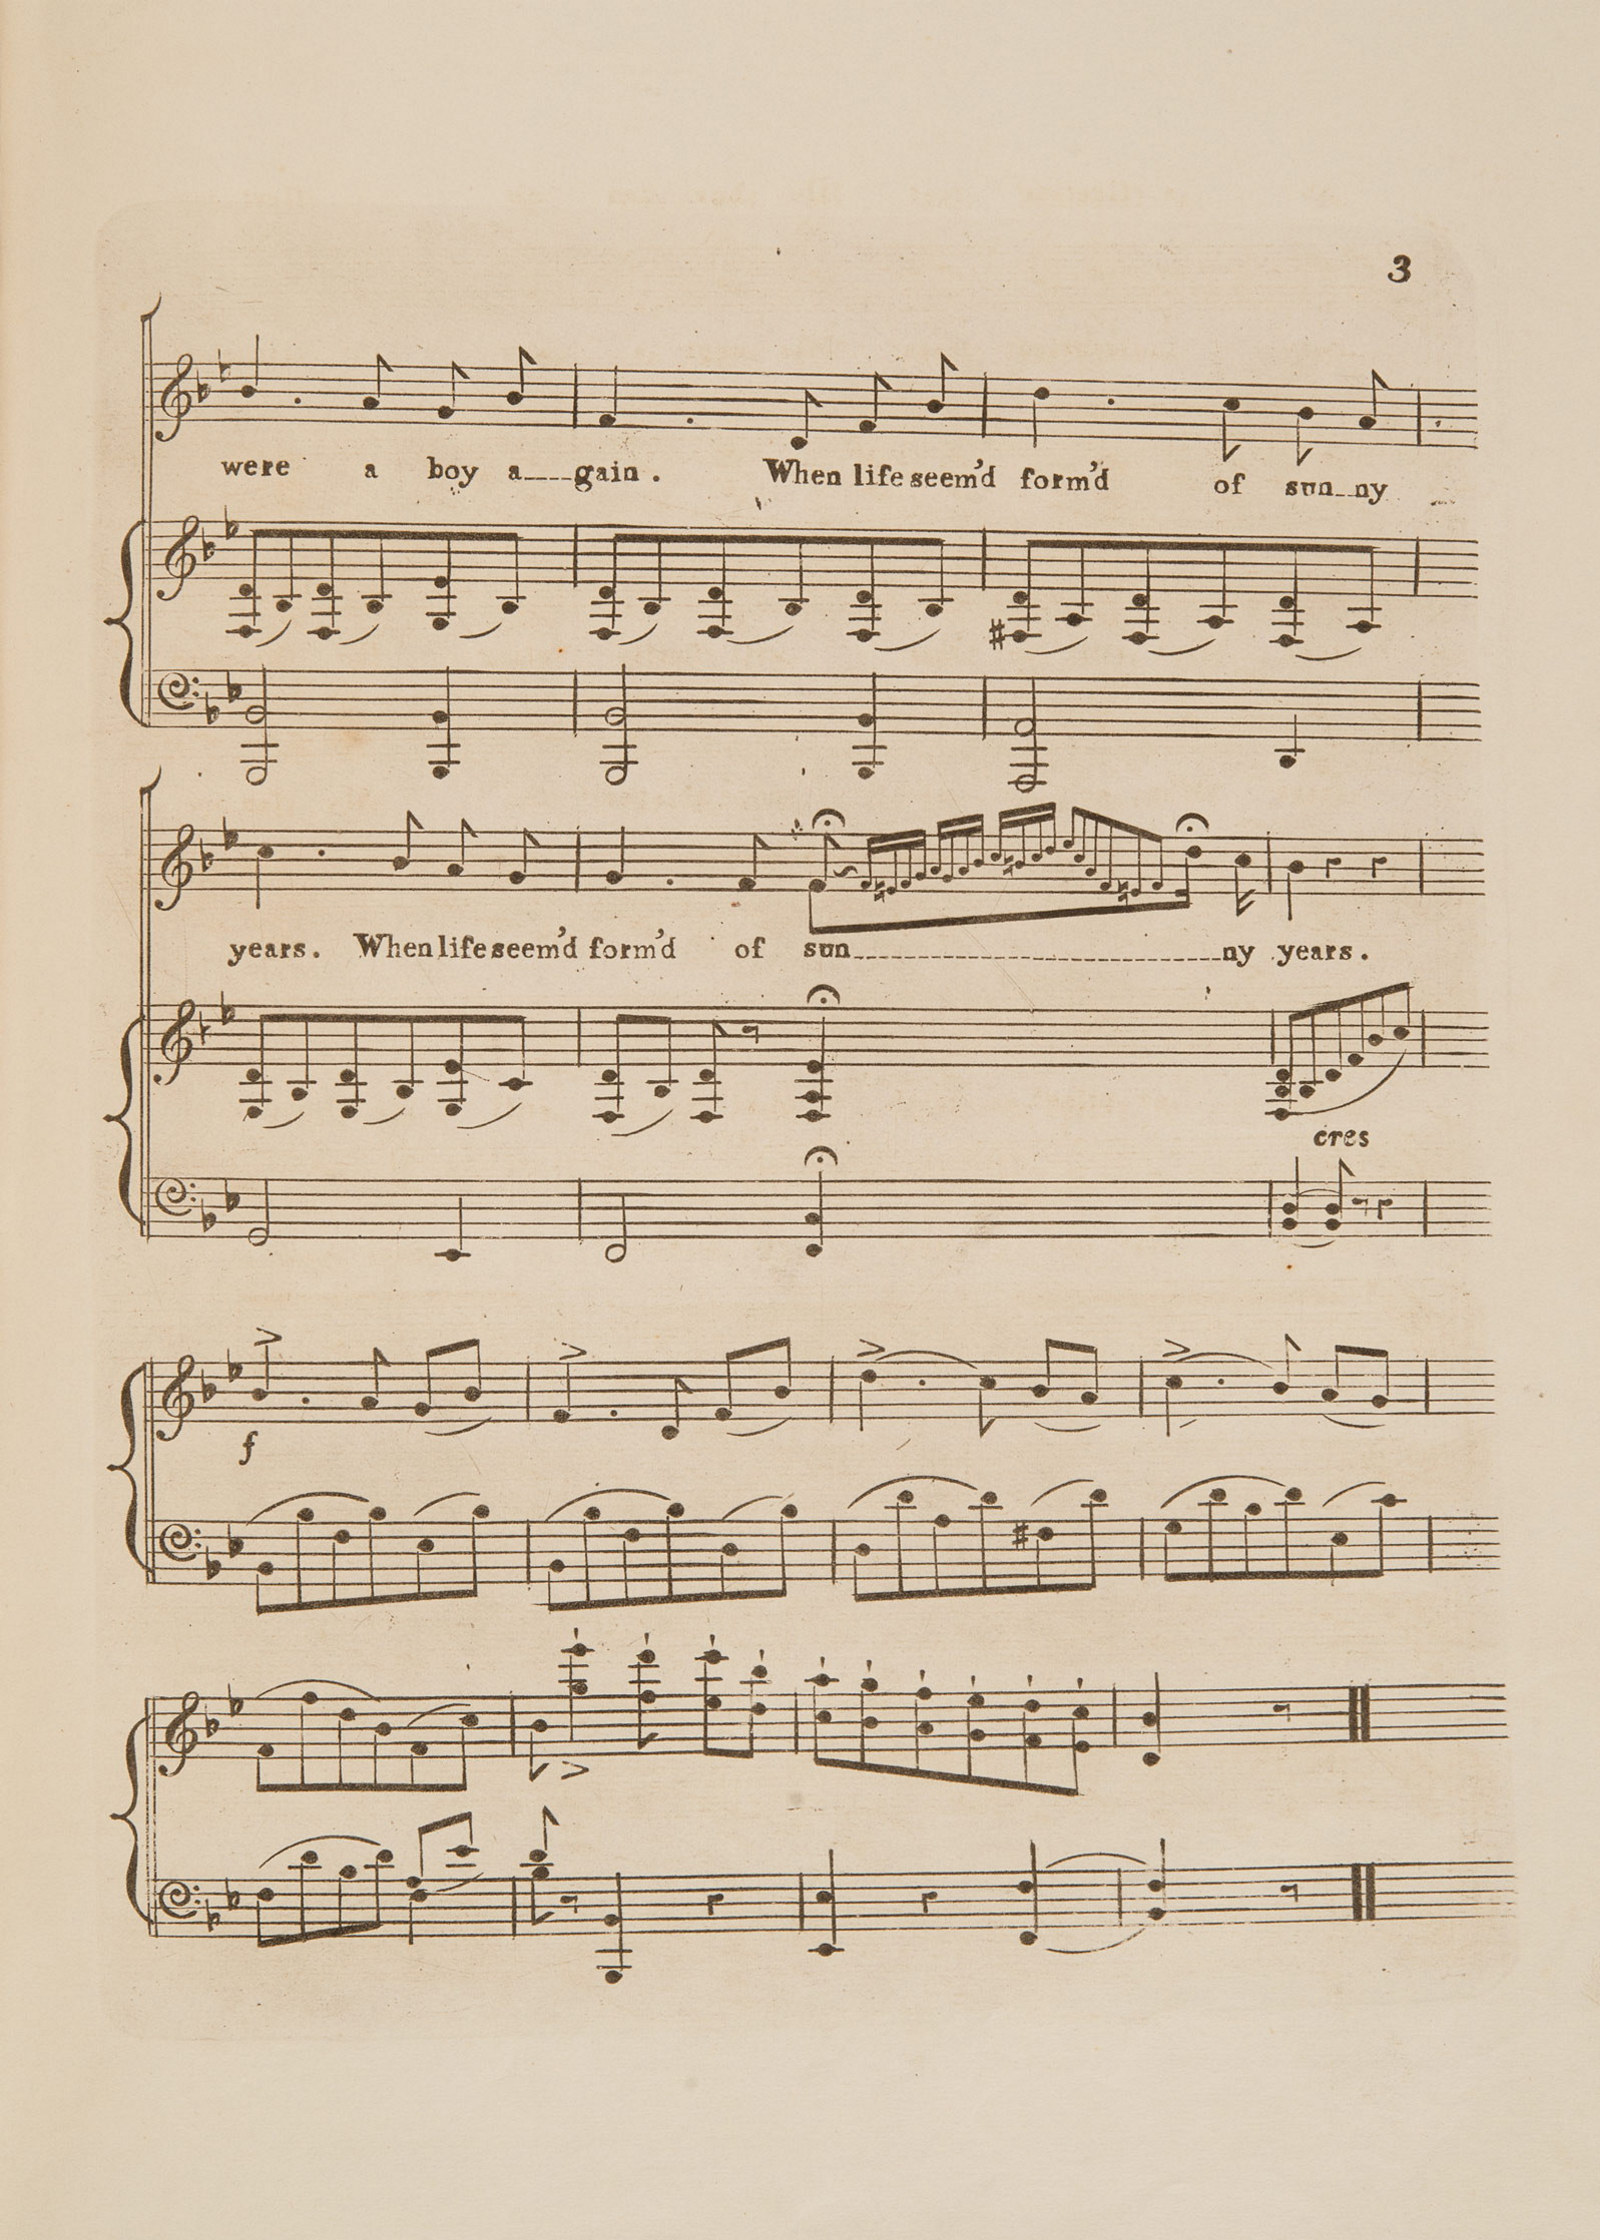 Sheet music, 'O, would I were a Boy again' by Frank Romer, page 3, published circa 1854